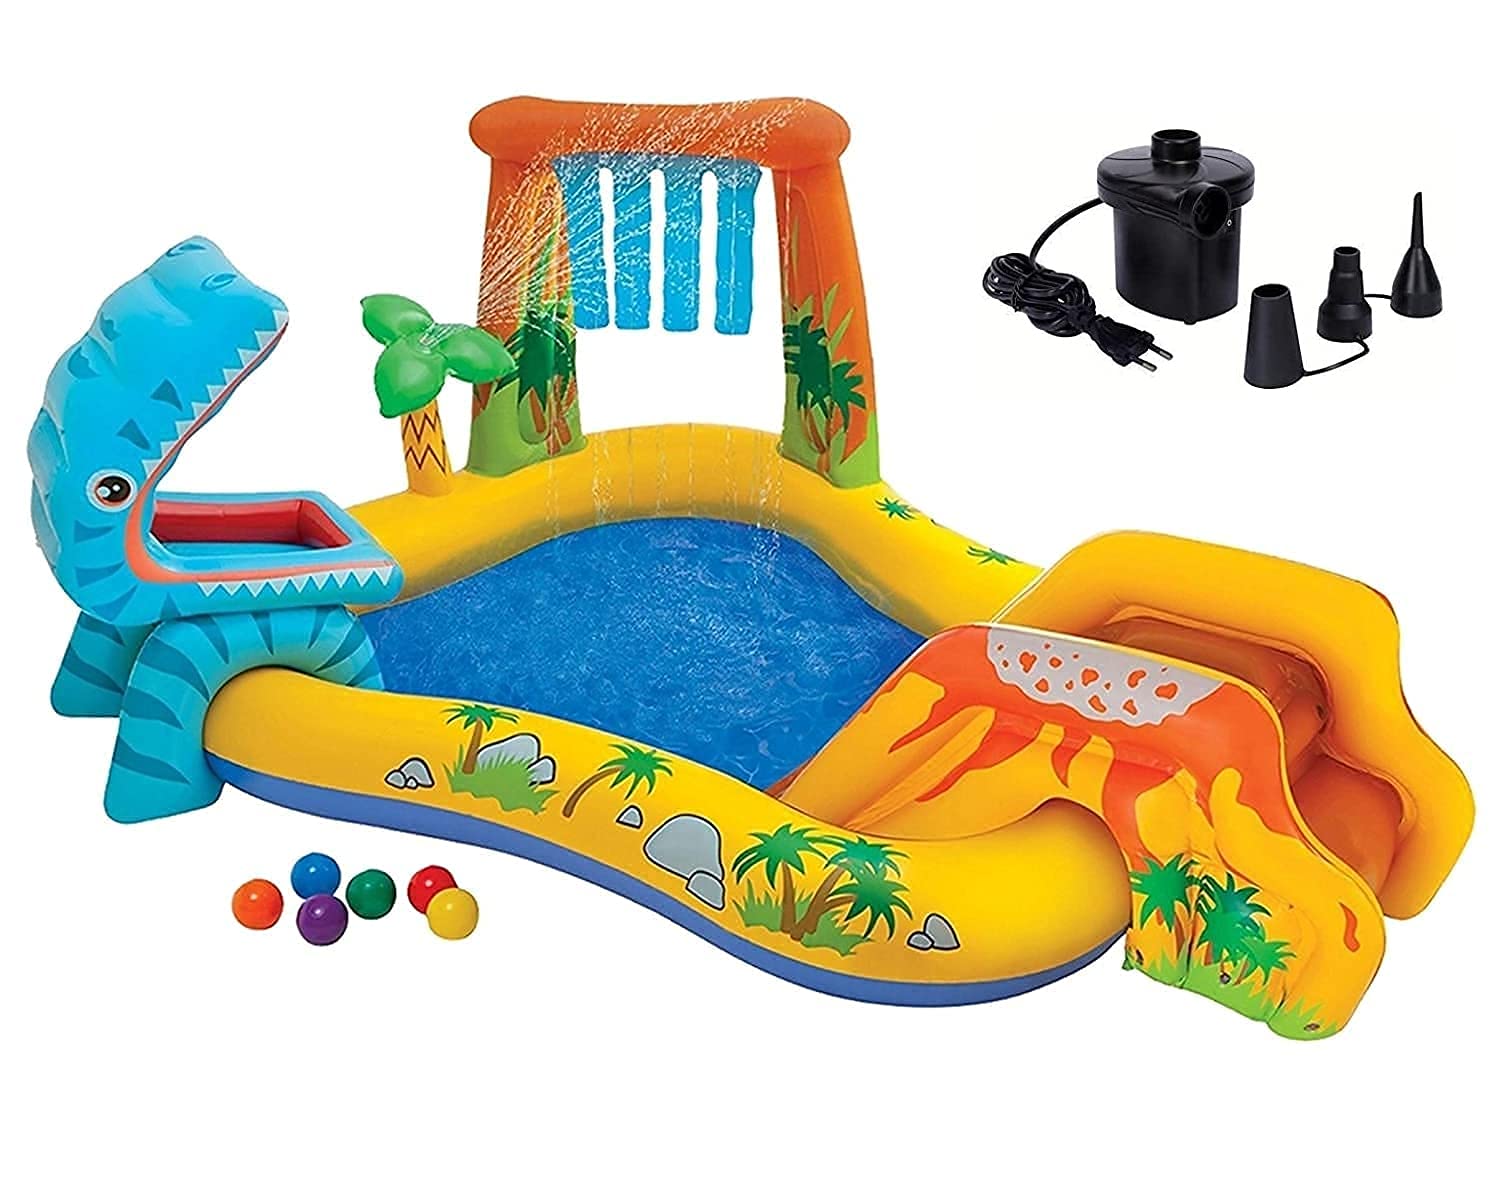 Kreative Marche-Kids Dinosaur Spray Water with Swimming Pool Inflatable Bath Tubs with Free Electric Pump-Stumbit Kids